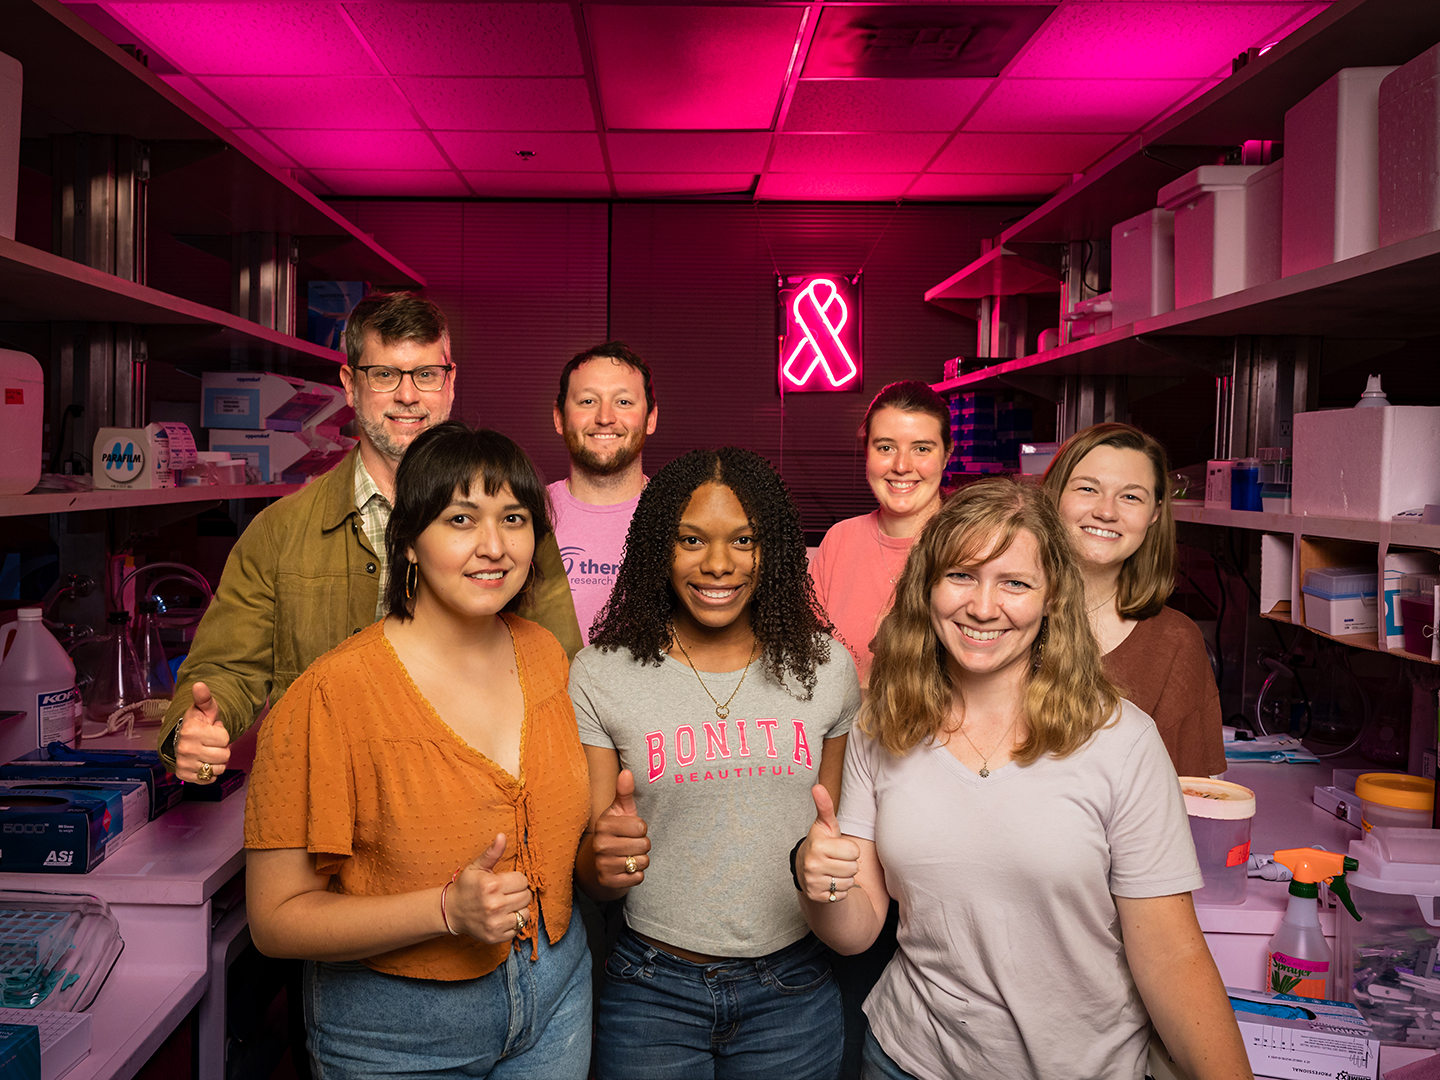 A group of people in the Porter lab, which is lit up with pink lights